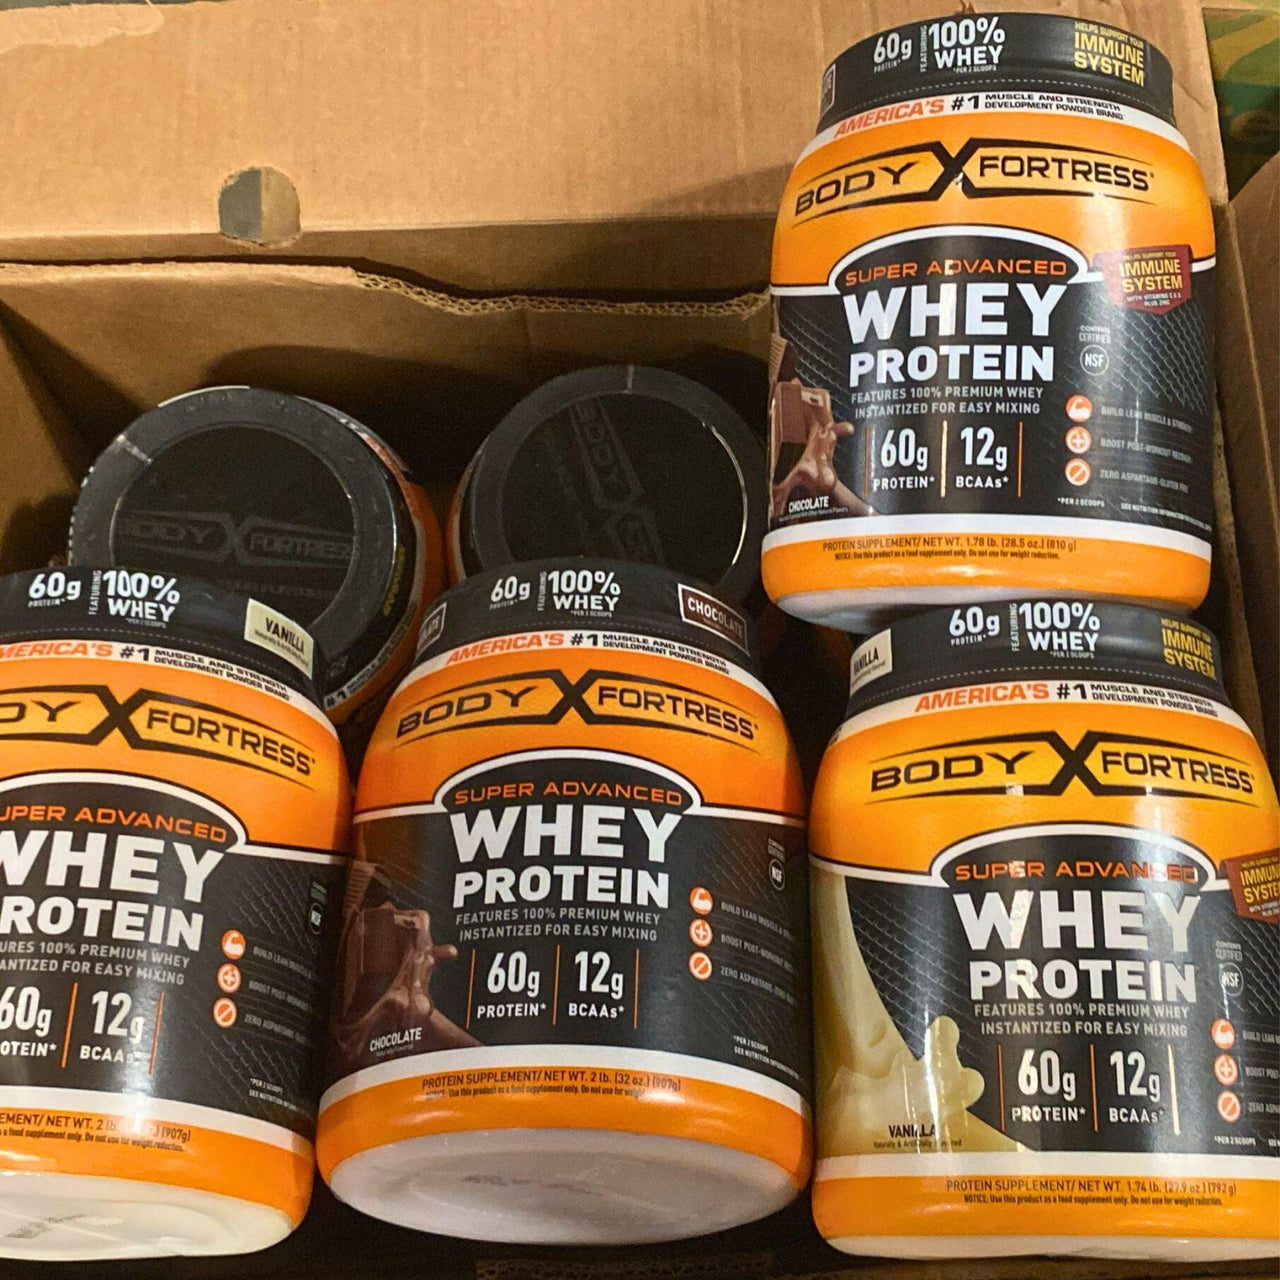 Super Advanced Whey Protein Powder - Chocolate-vanilla Flavor With Immune Support 60g Protein 12g BCAAS, 1.78lb (24 Pcs Lot) - Discount Wholesalers Inc